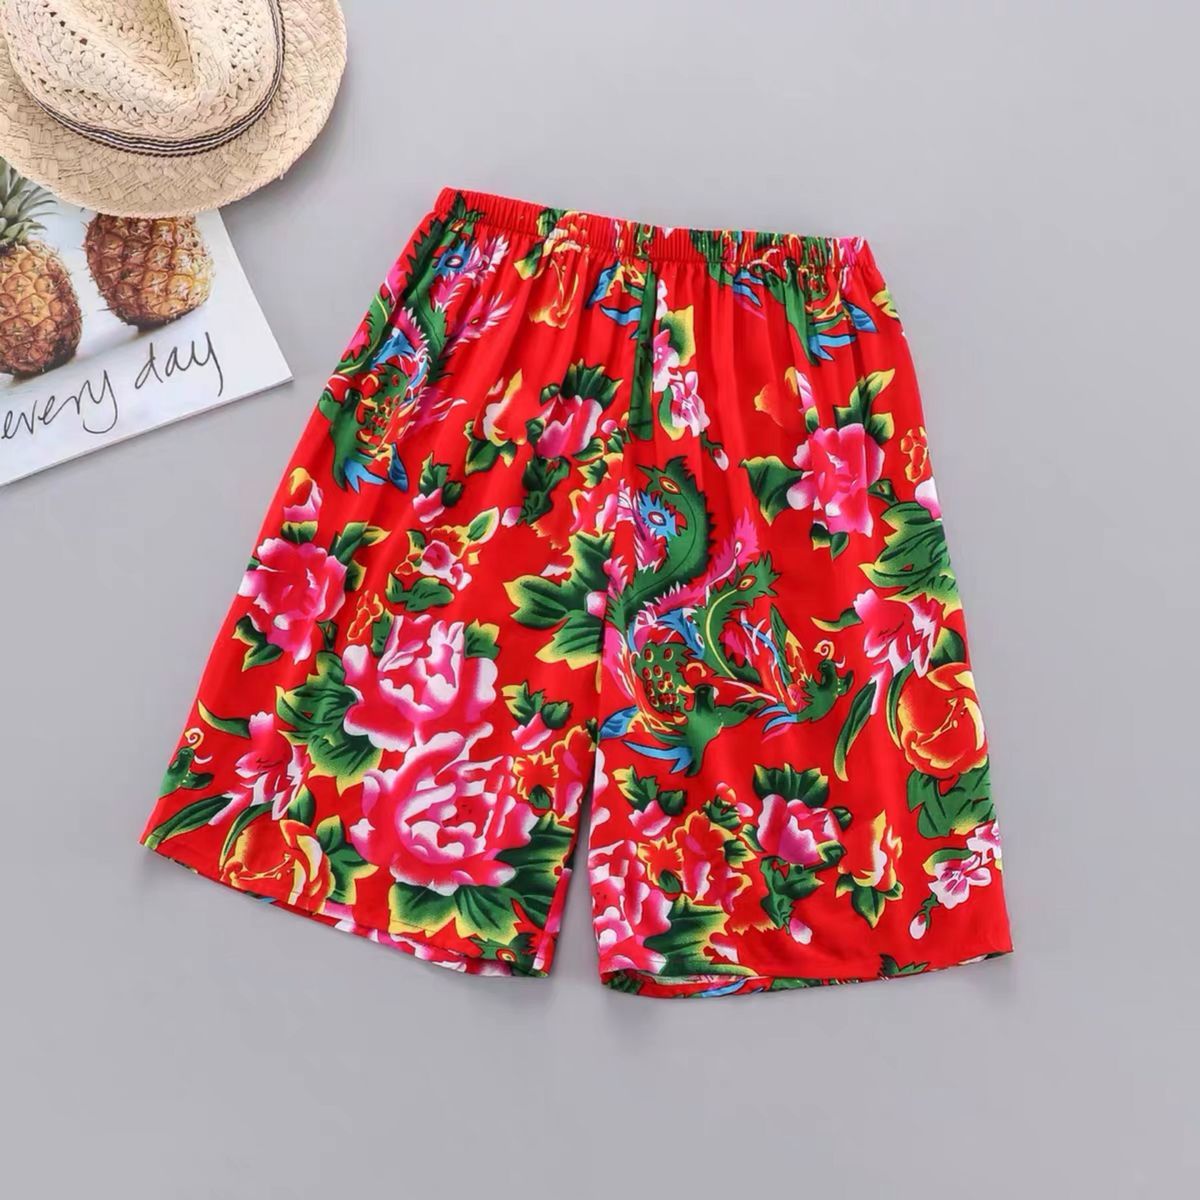 Douyin Fried Street Handsome Northeast Big Flower Pants Harajuku Style Net Red Flower Pants Loose Hip Hop Casual Shorts Men's and Women's Fashion